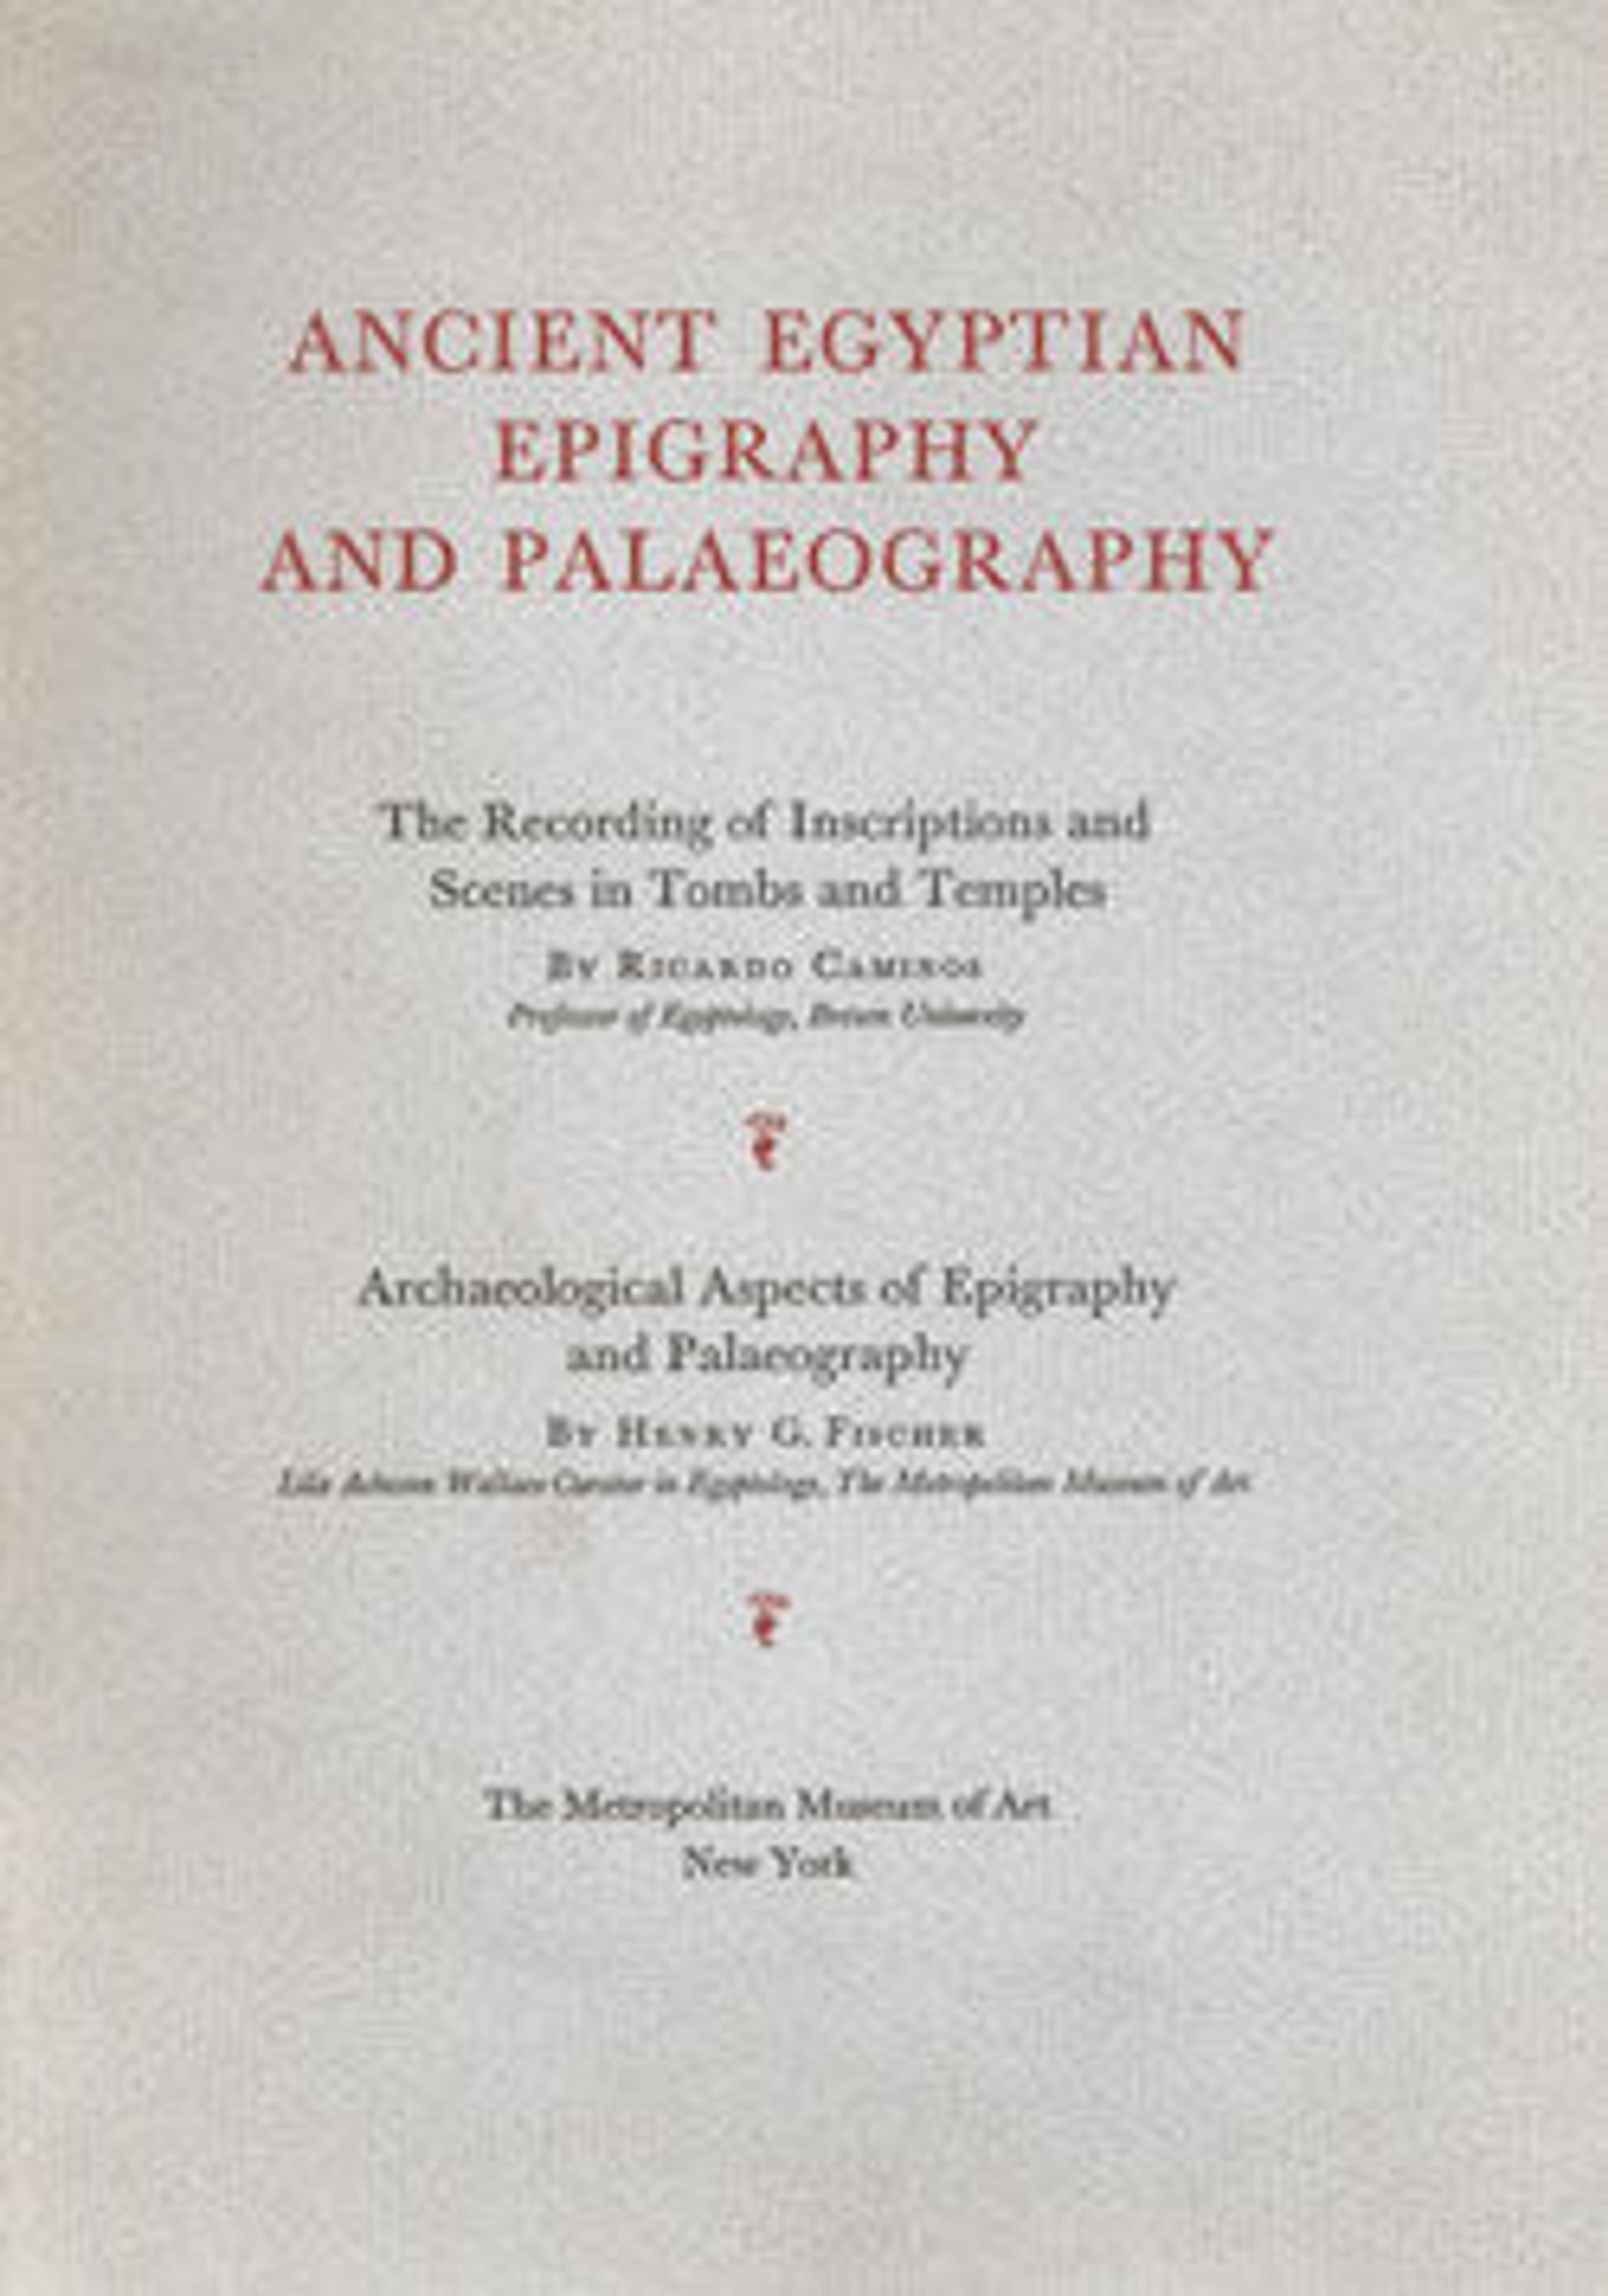 Ancient Egyptian Epigraphy and Palaeography